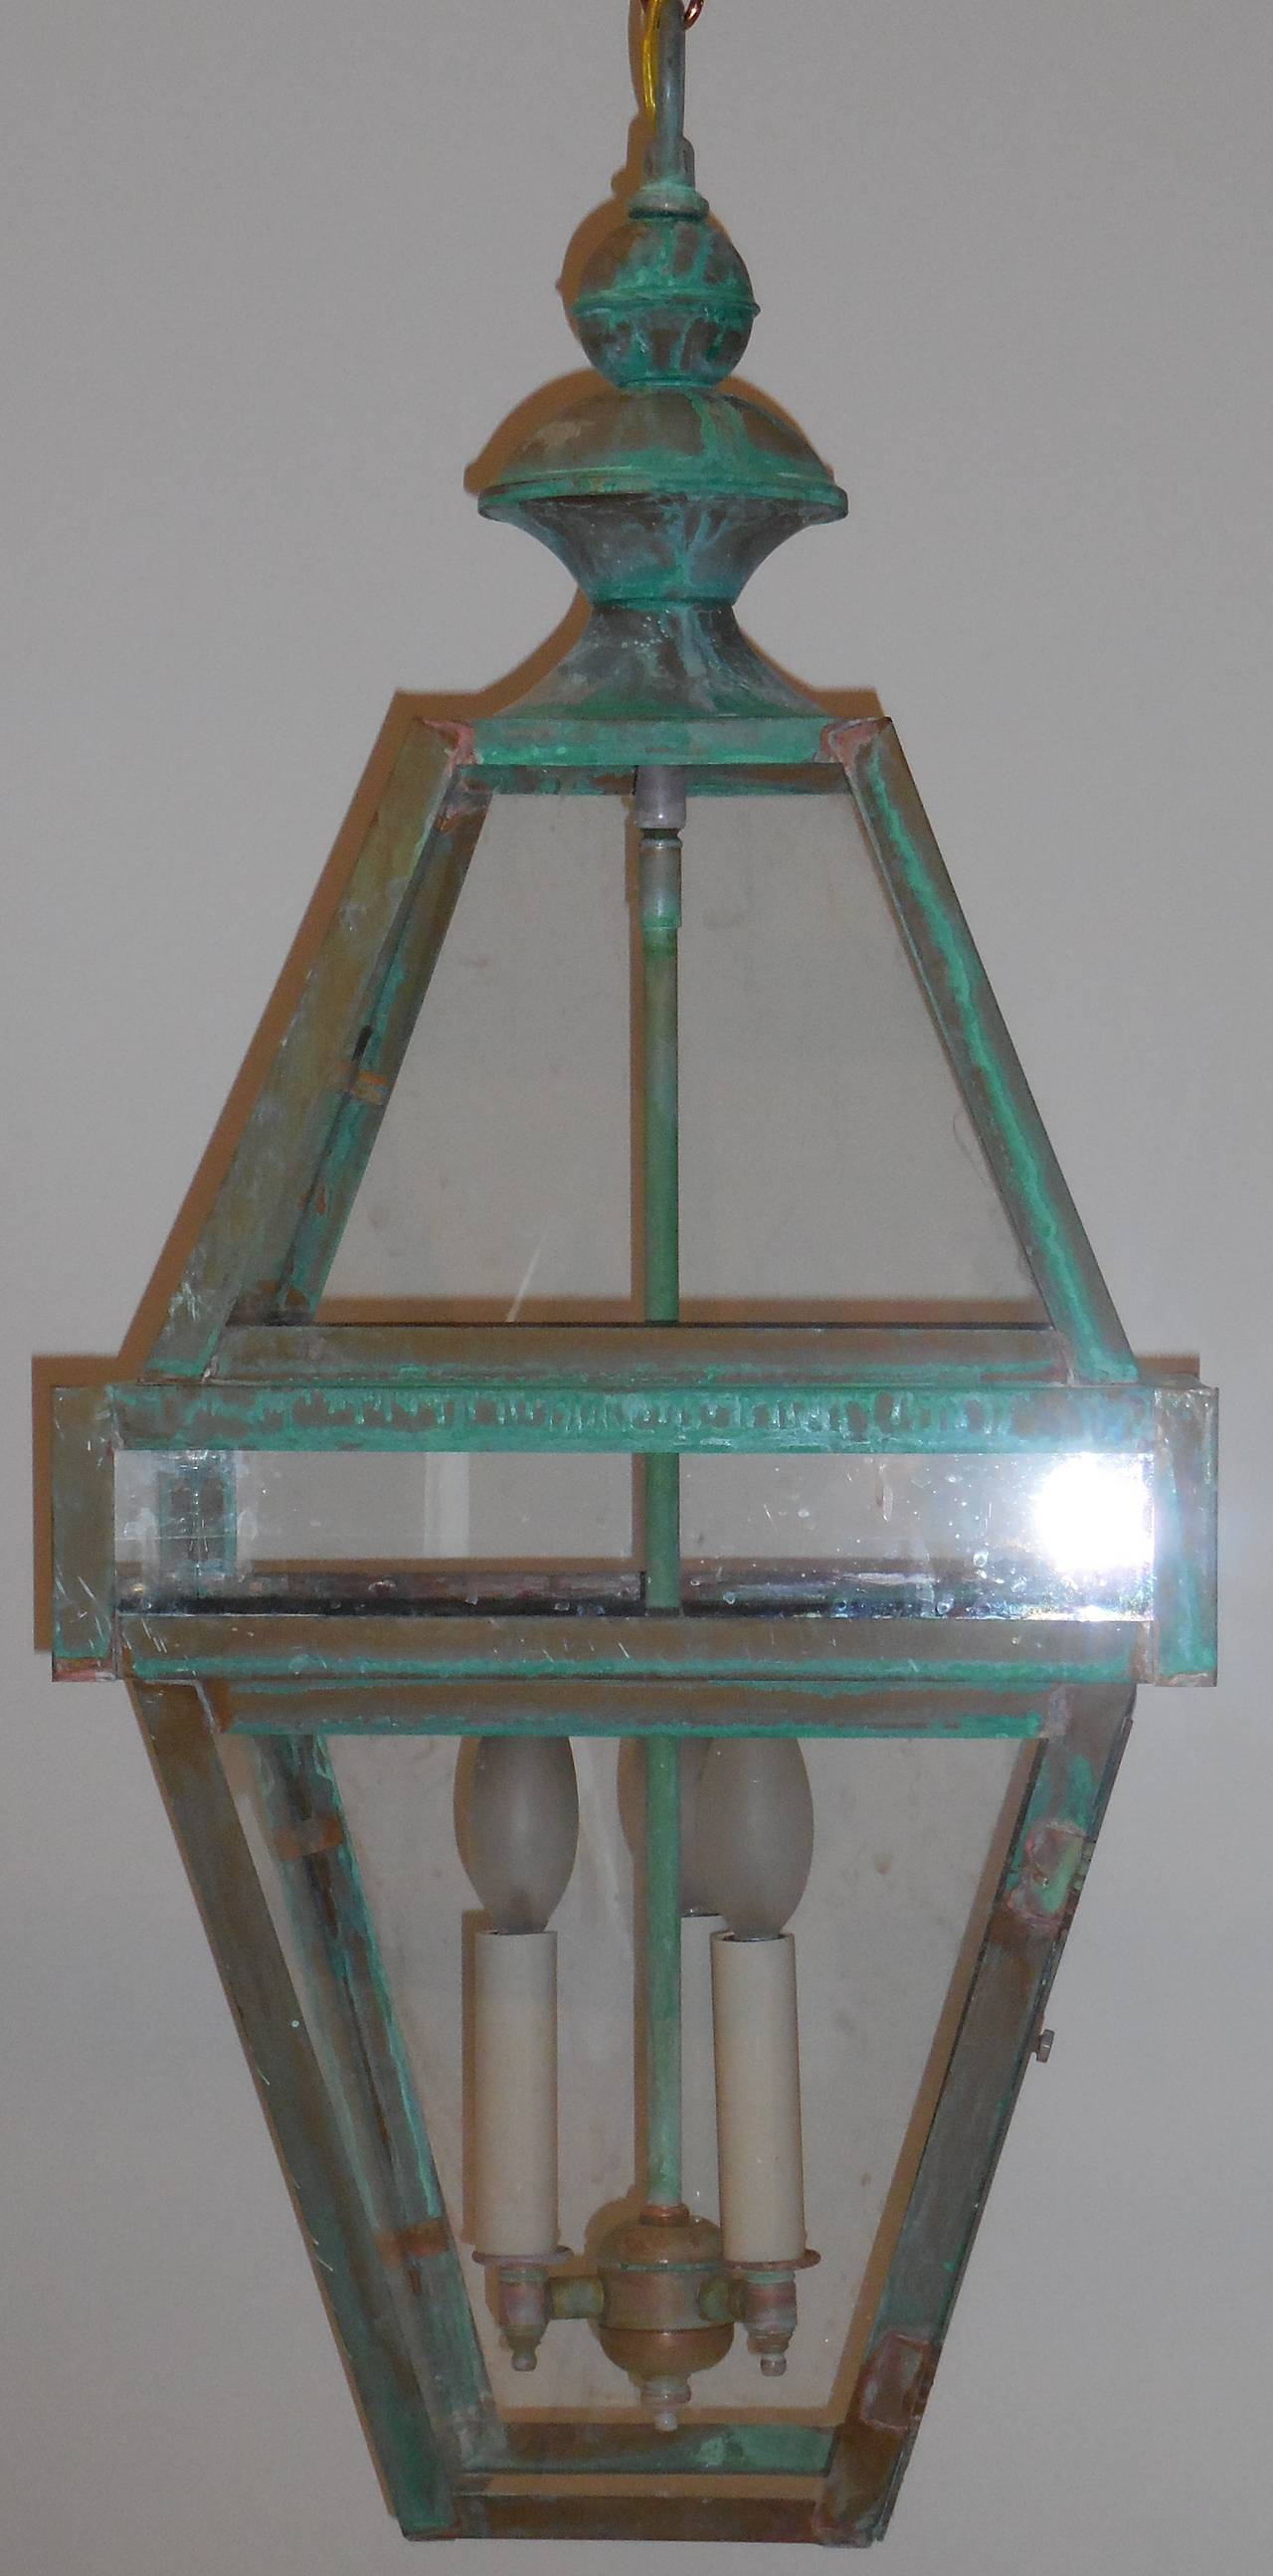 Copper Four-Sided Architectural Hanging Lantern